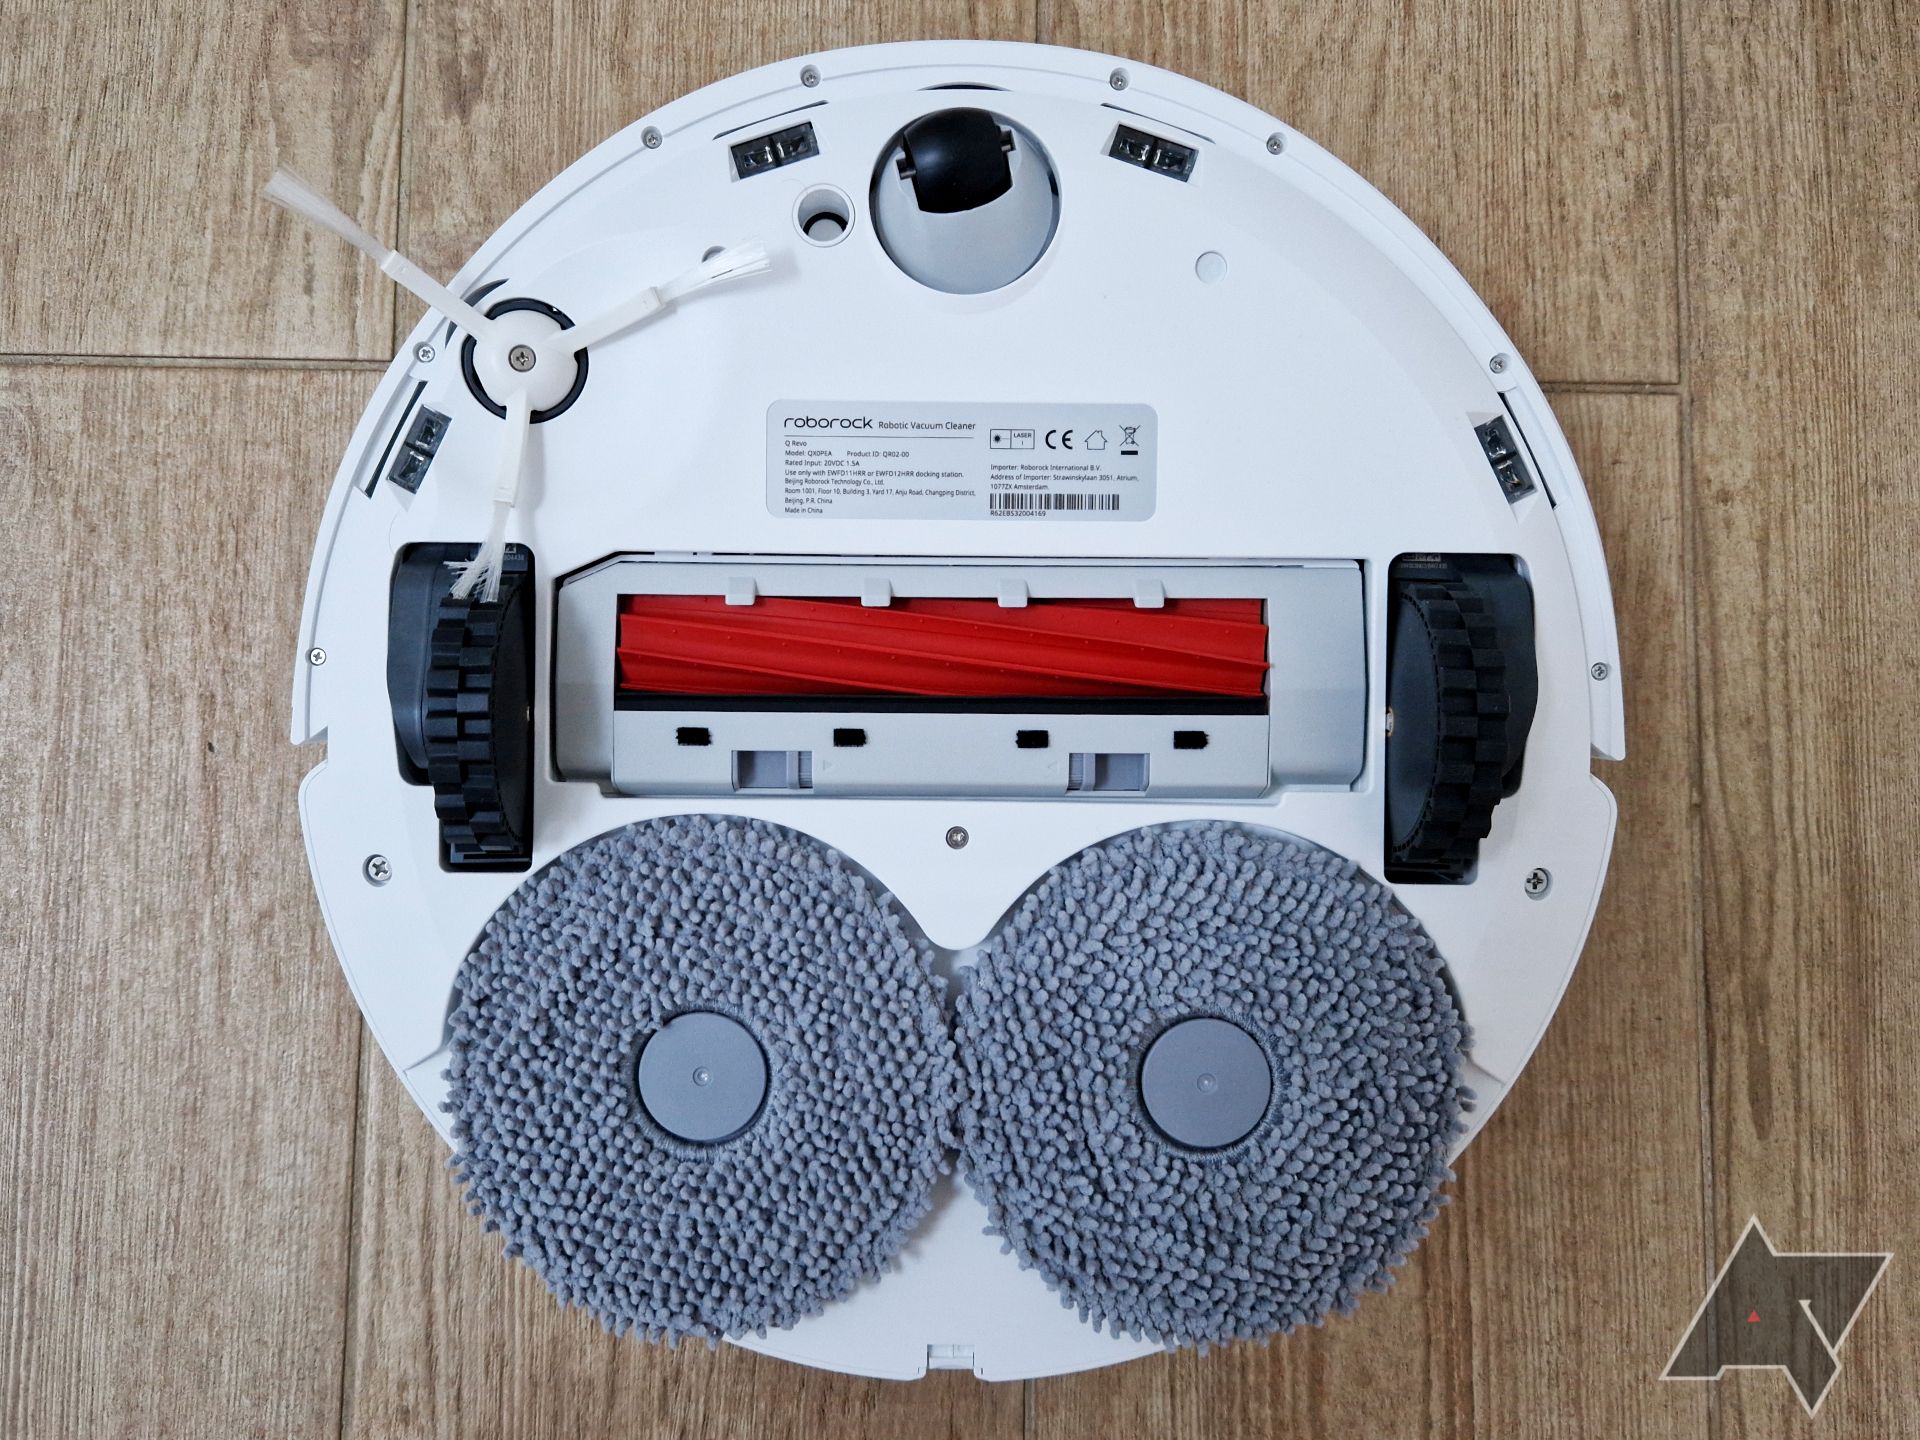 Roborock Q Revo review: High-end cleaning at a competitive price